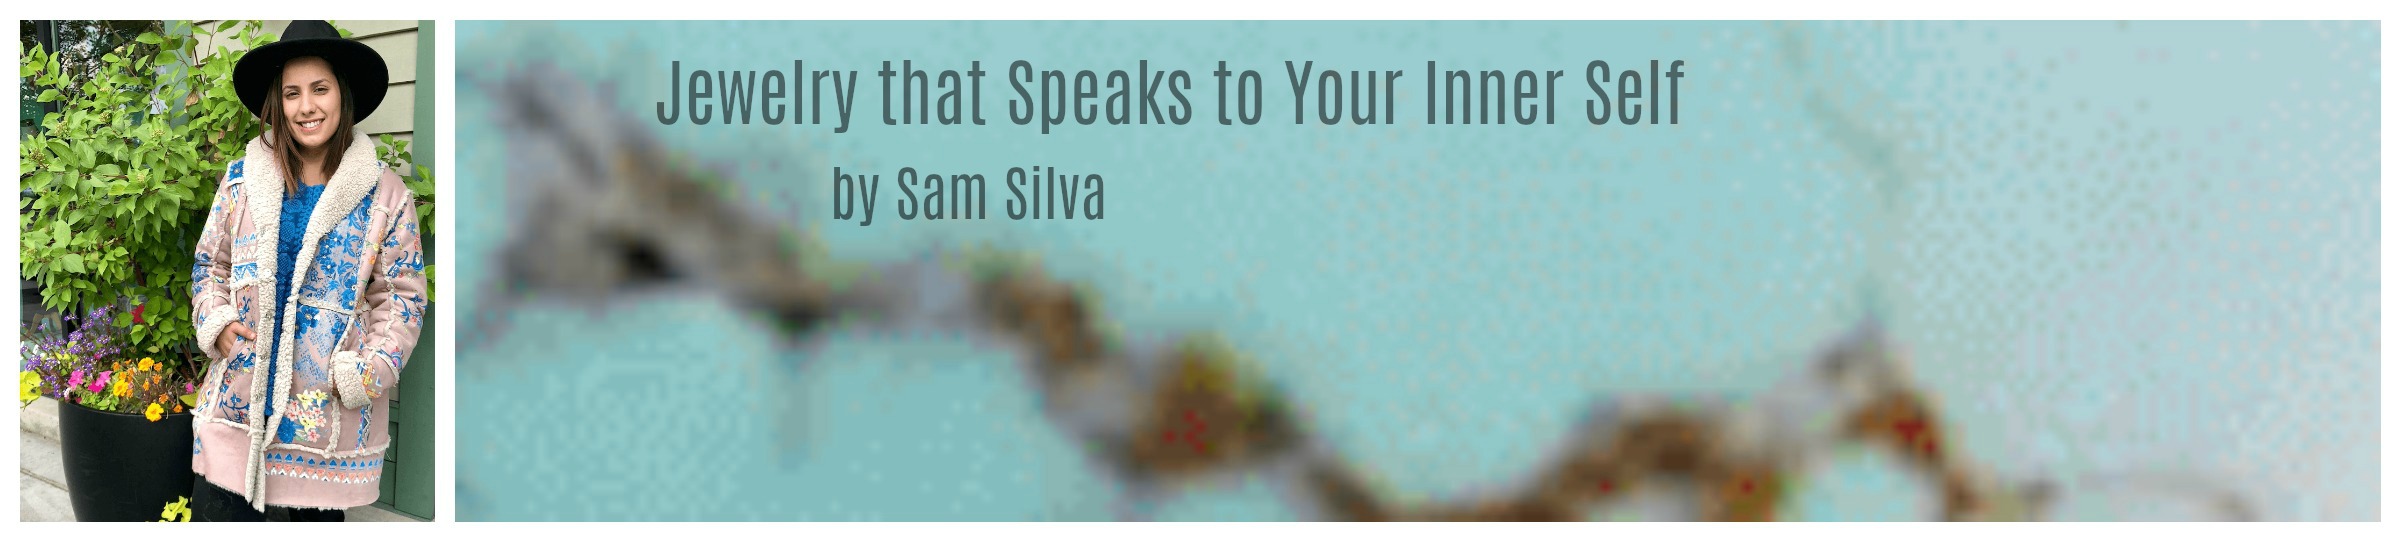 Image of Sam Silva with title "Jewelry that Speaks to You"